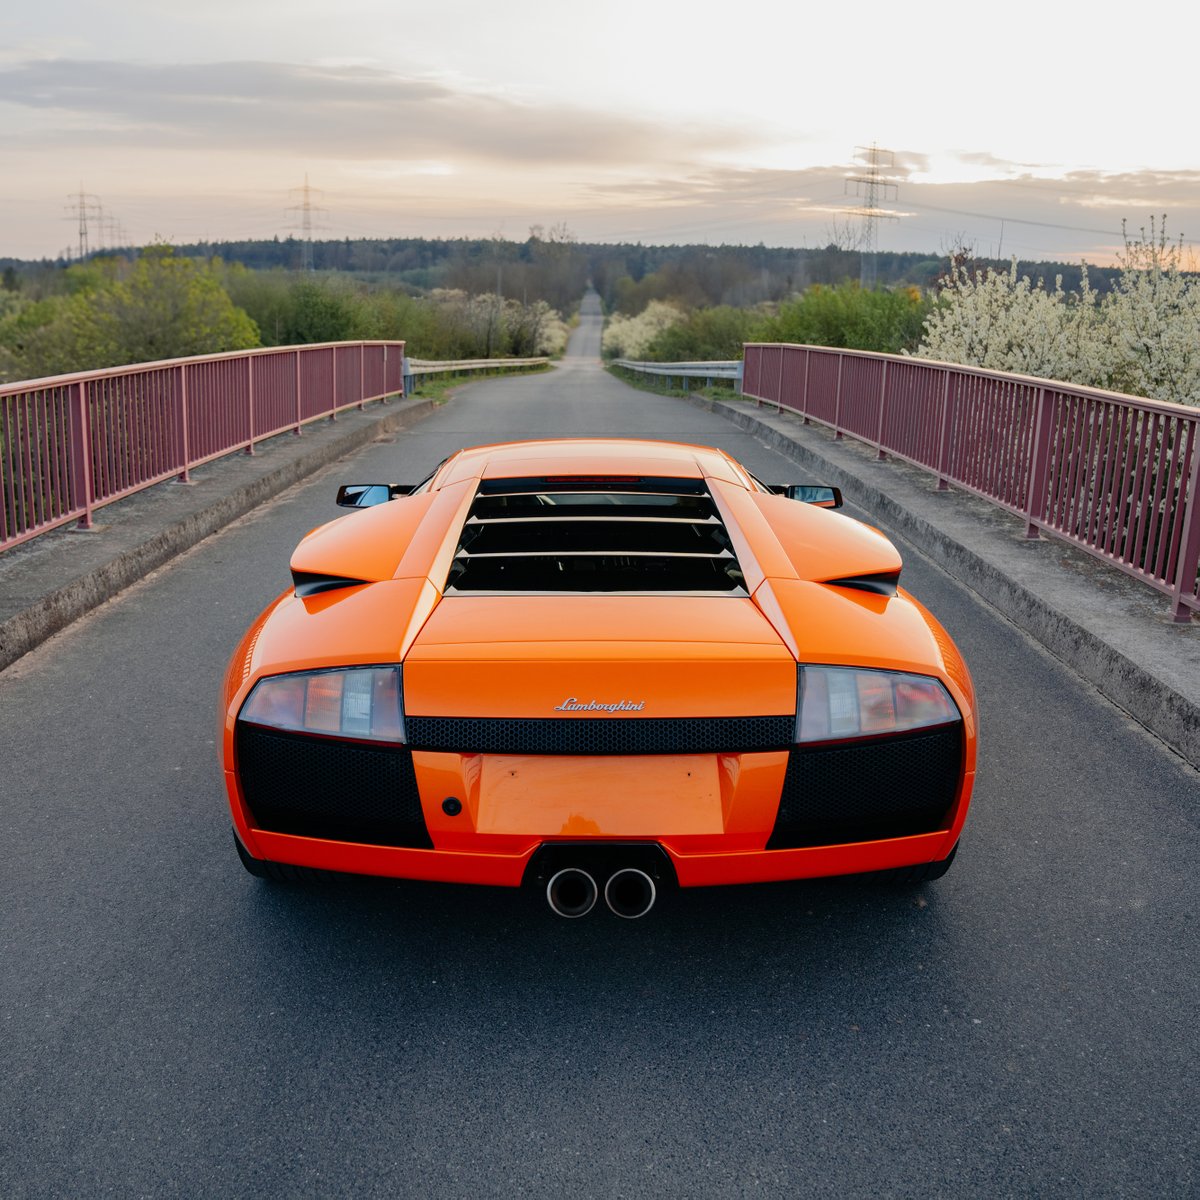 Lamborghini's legacy shines through its V-12 sports cars. The Murciélago boasts a 6.2L V-12 and a six-speed manual, hitting 0-97 km/h in 3.8s. Don't miss this meticulously serviced 2002 model in Arancio Atlas. Register to bid at bit.ly/3Qeww1x. #RMMonaco #RMSothebys